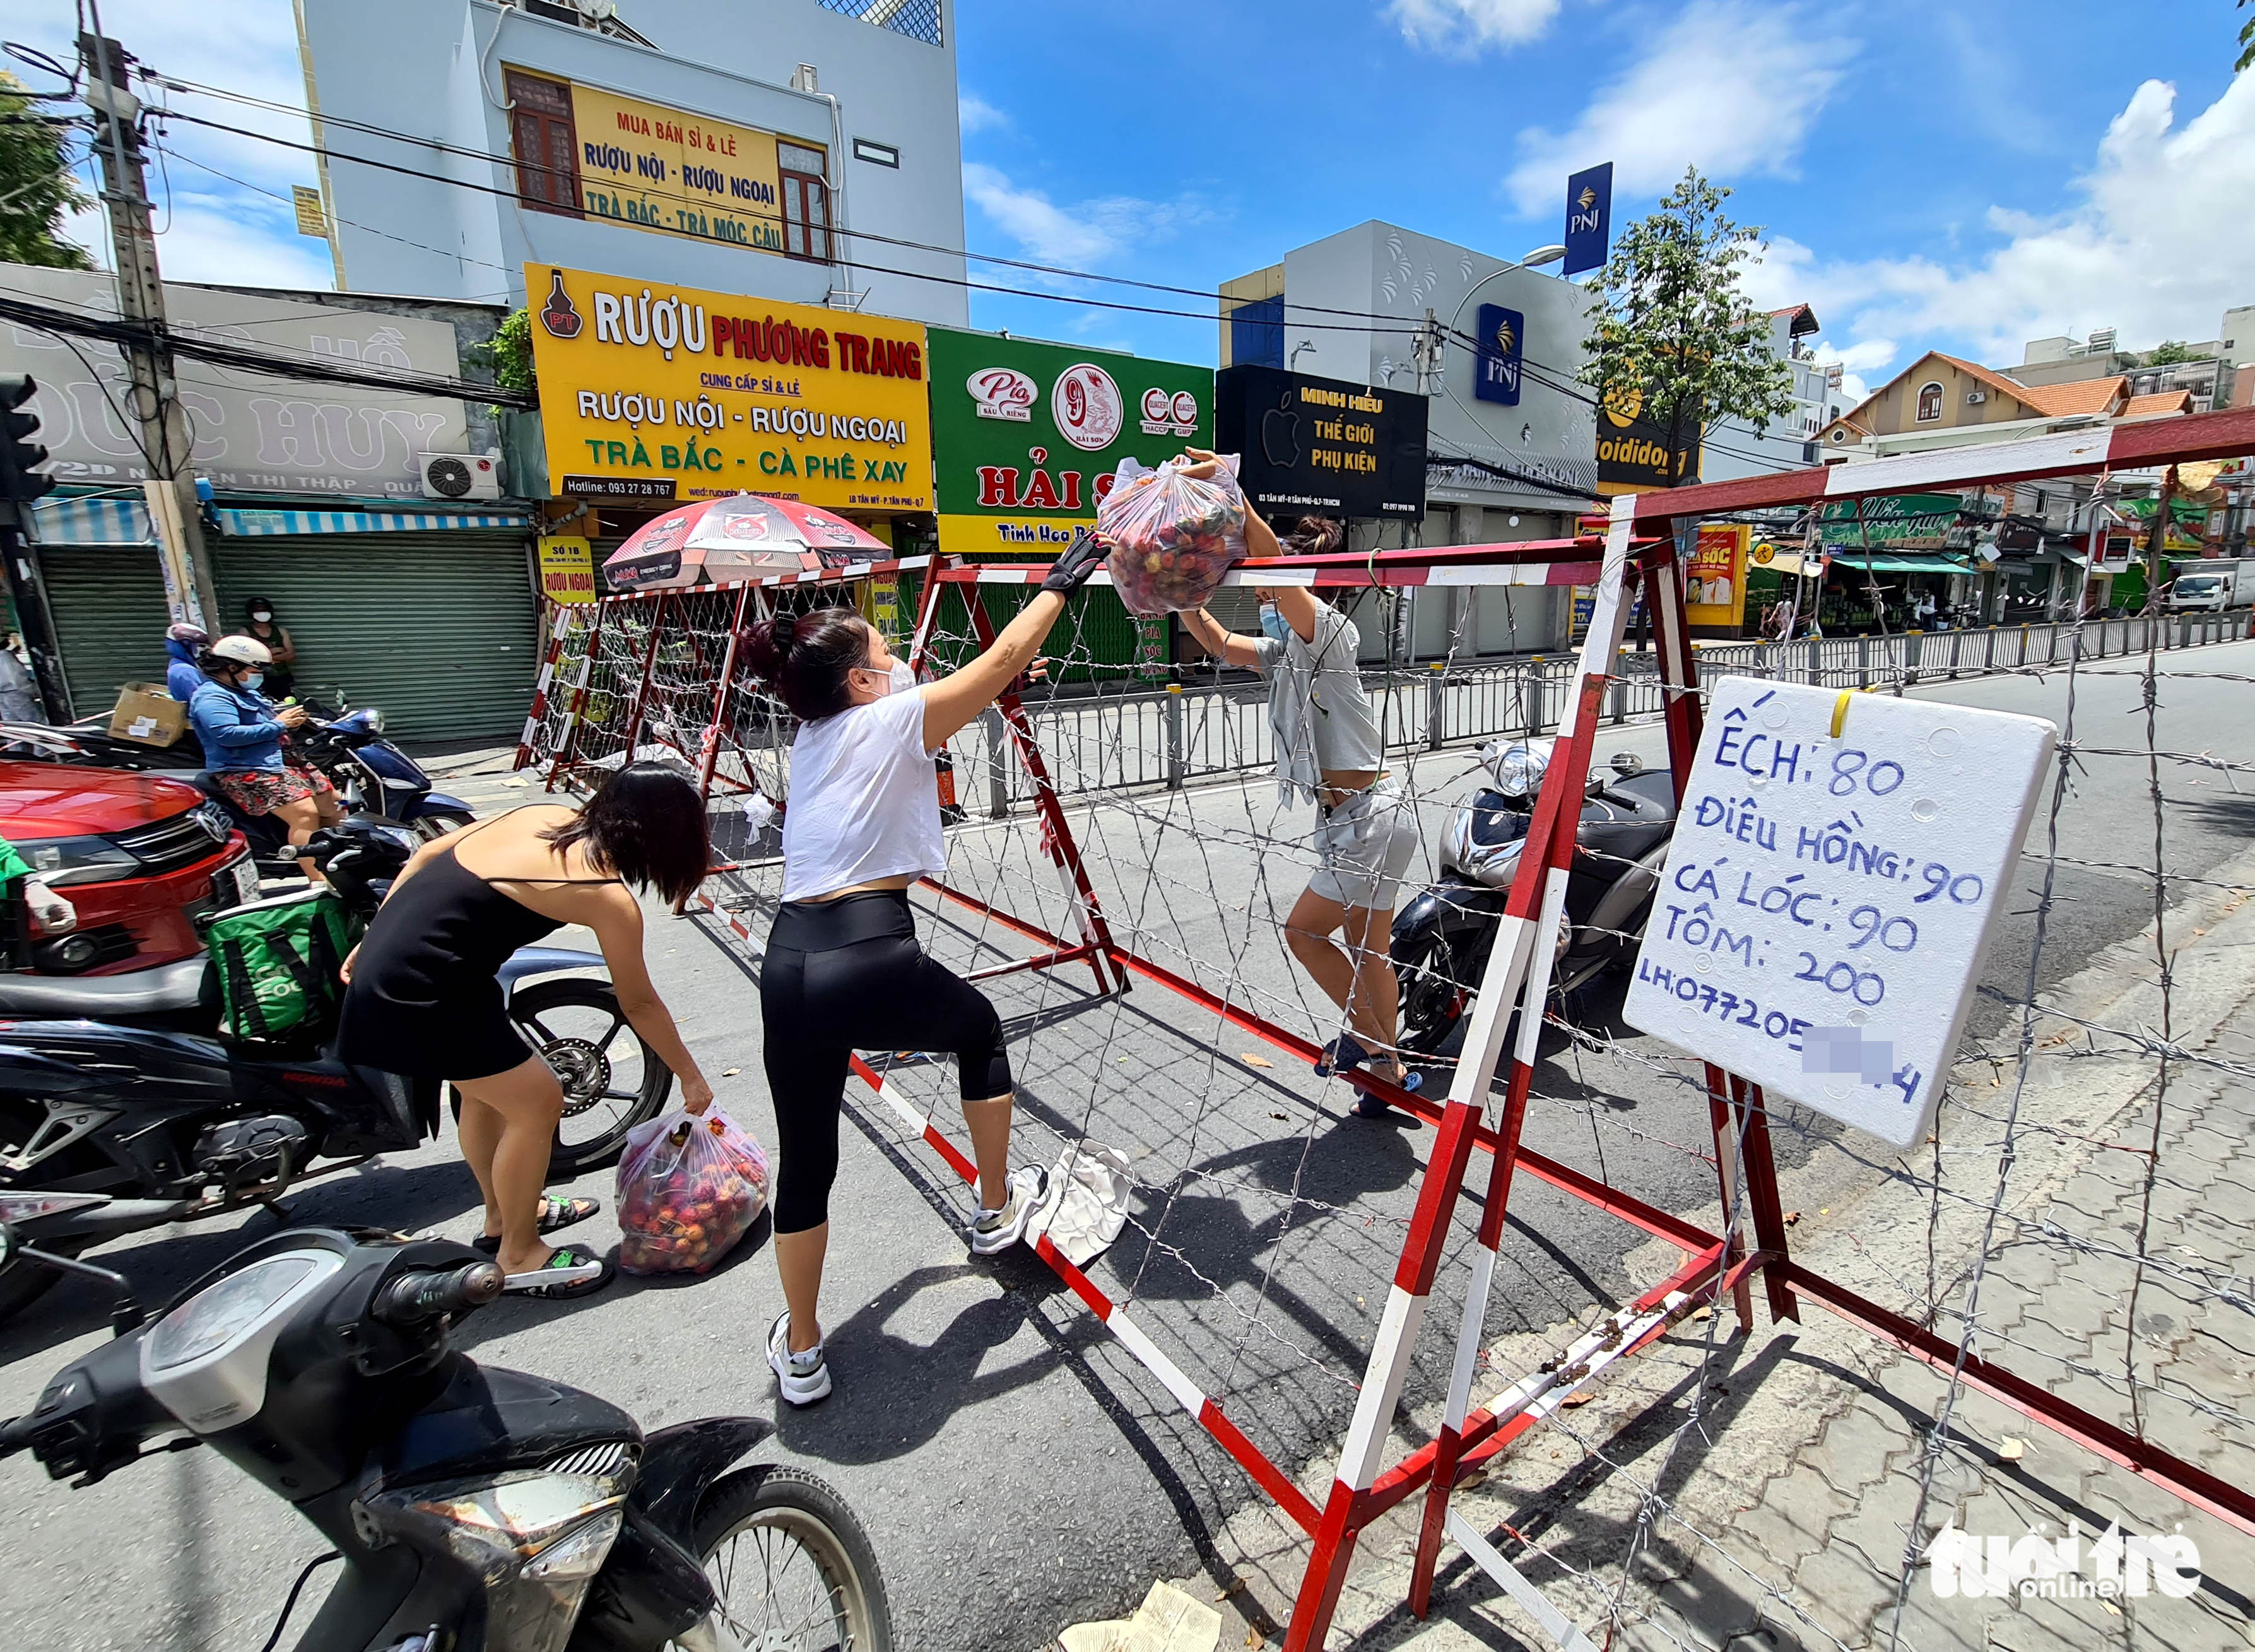 Ho Chi Minh City to remove COVID-19 checkpoints, barricades by September 30